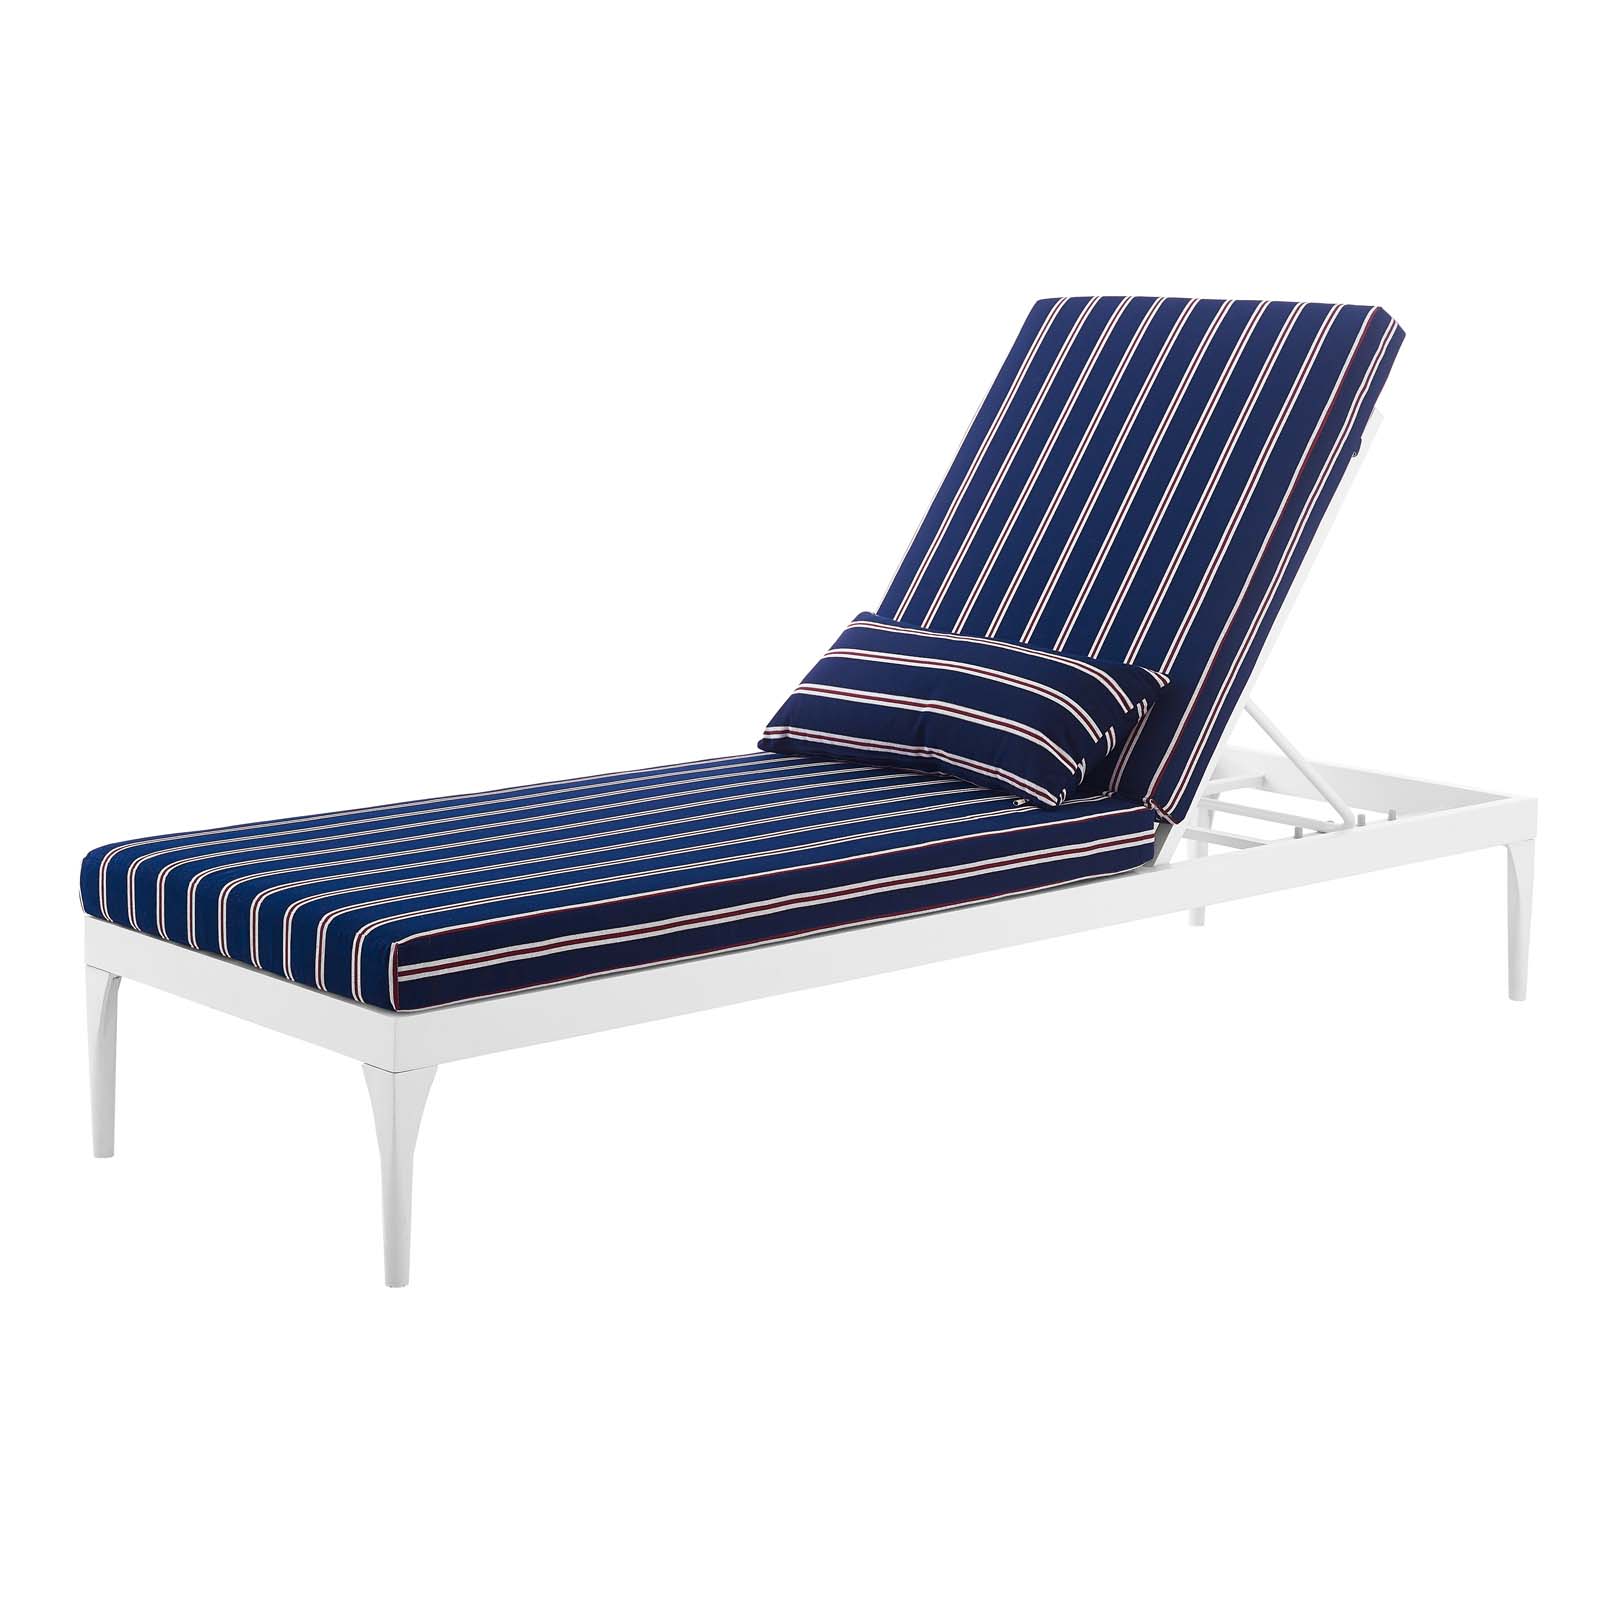 Modern Contemporary Urban Design Outdoor Patio Balcony Garden Furniture Lounge Chair Chaise, Fabric Metal Steel, White Navy - image 1 of 7